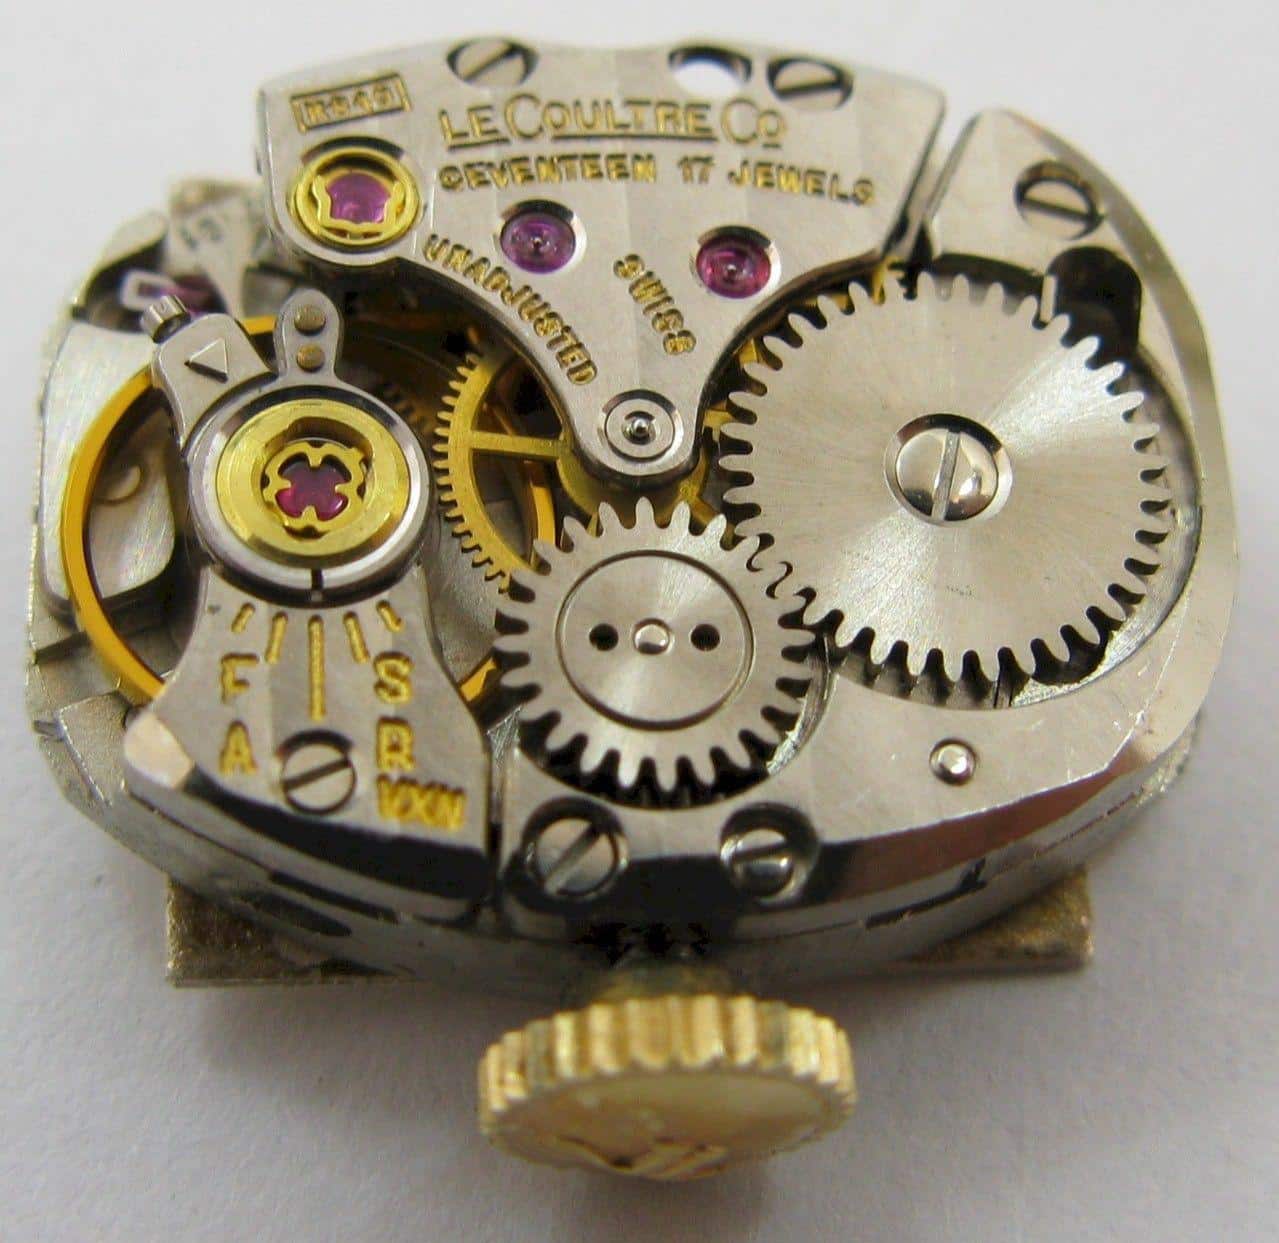 LeCoultre caliber 840 movement – specifications and photo